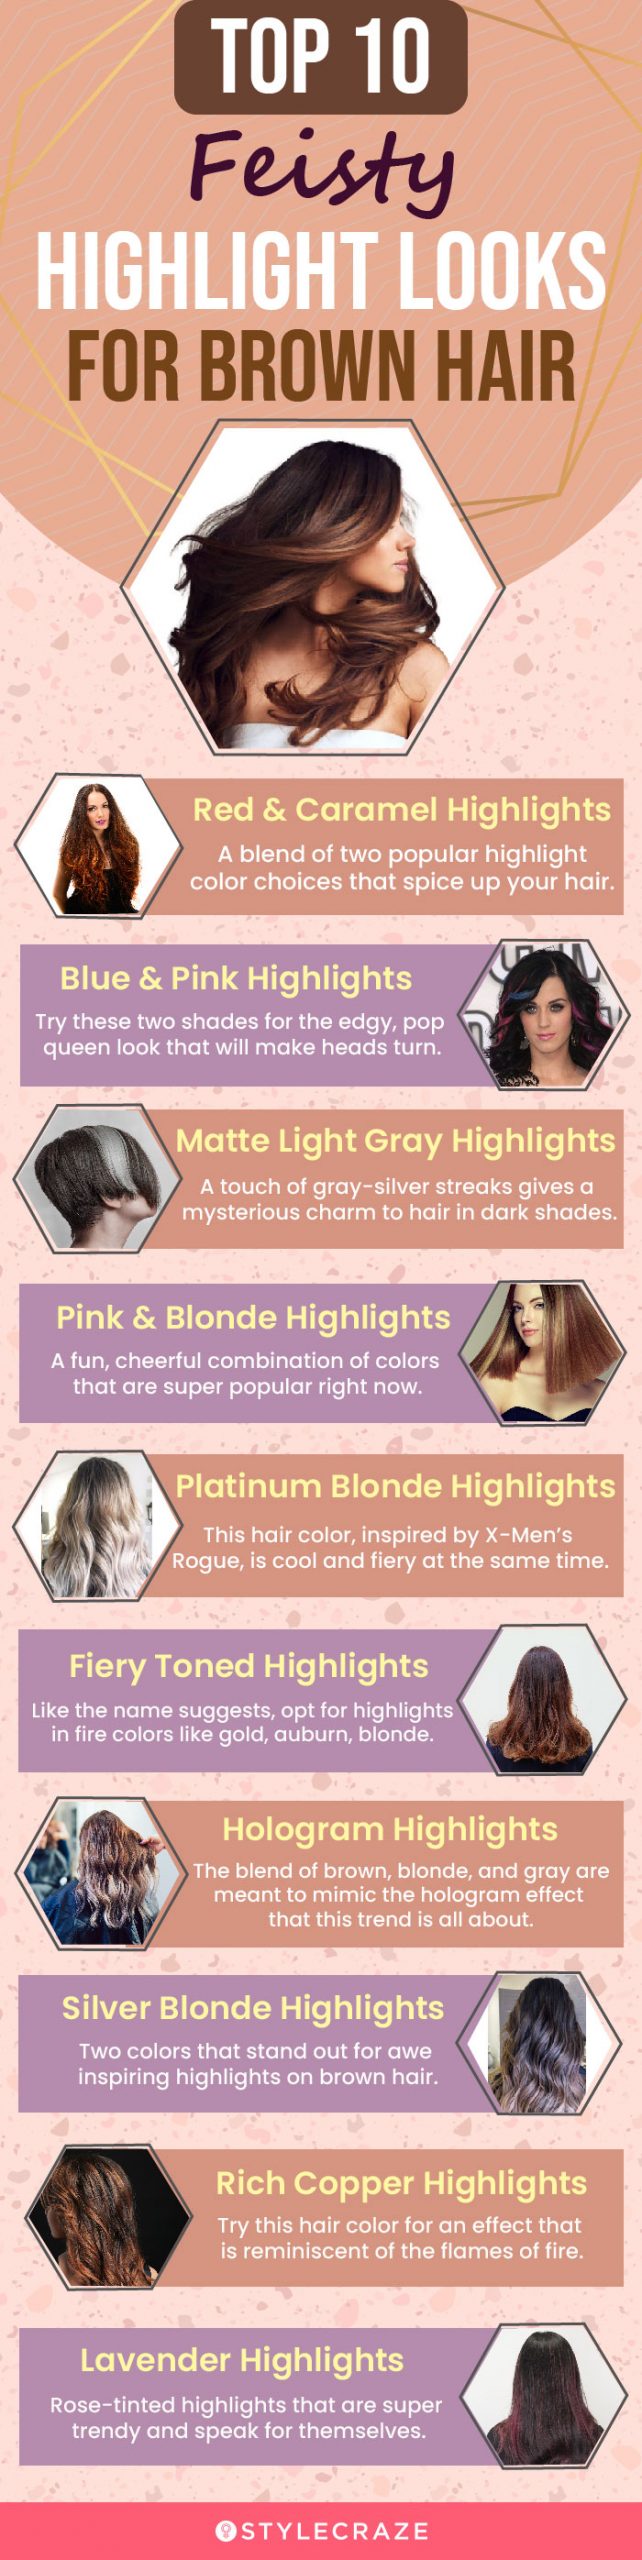 top 10 feisty highlight looks for brown hair [infographic]